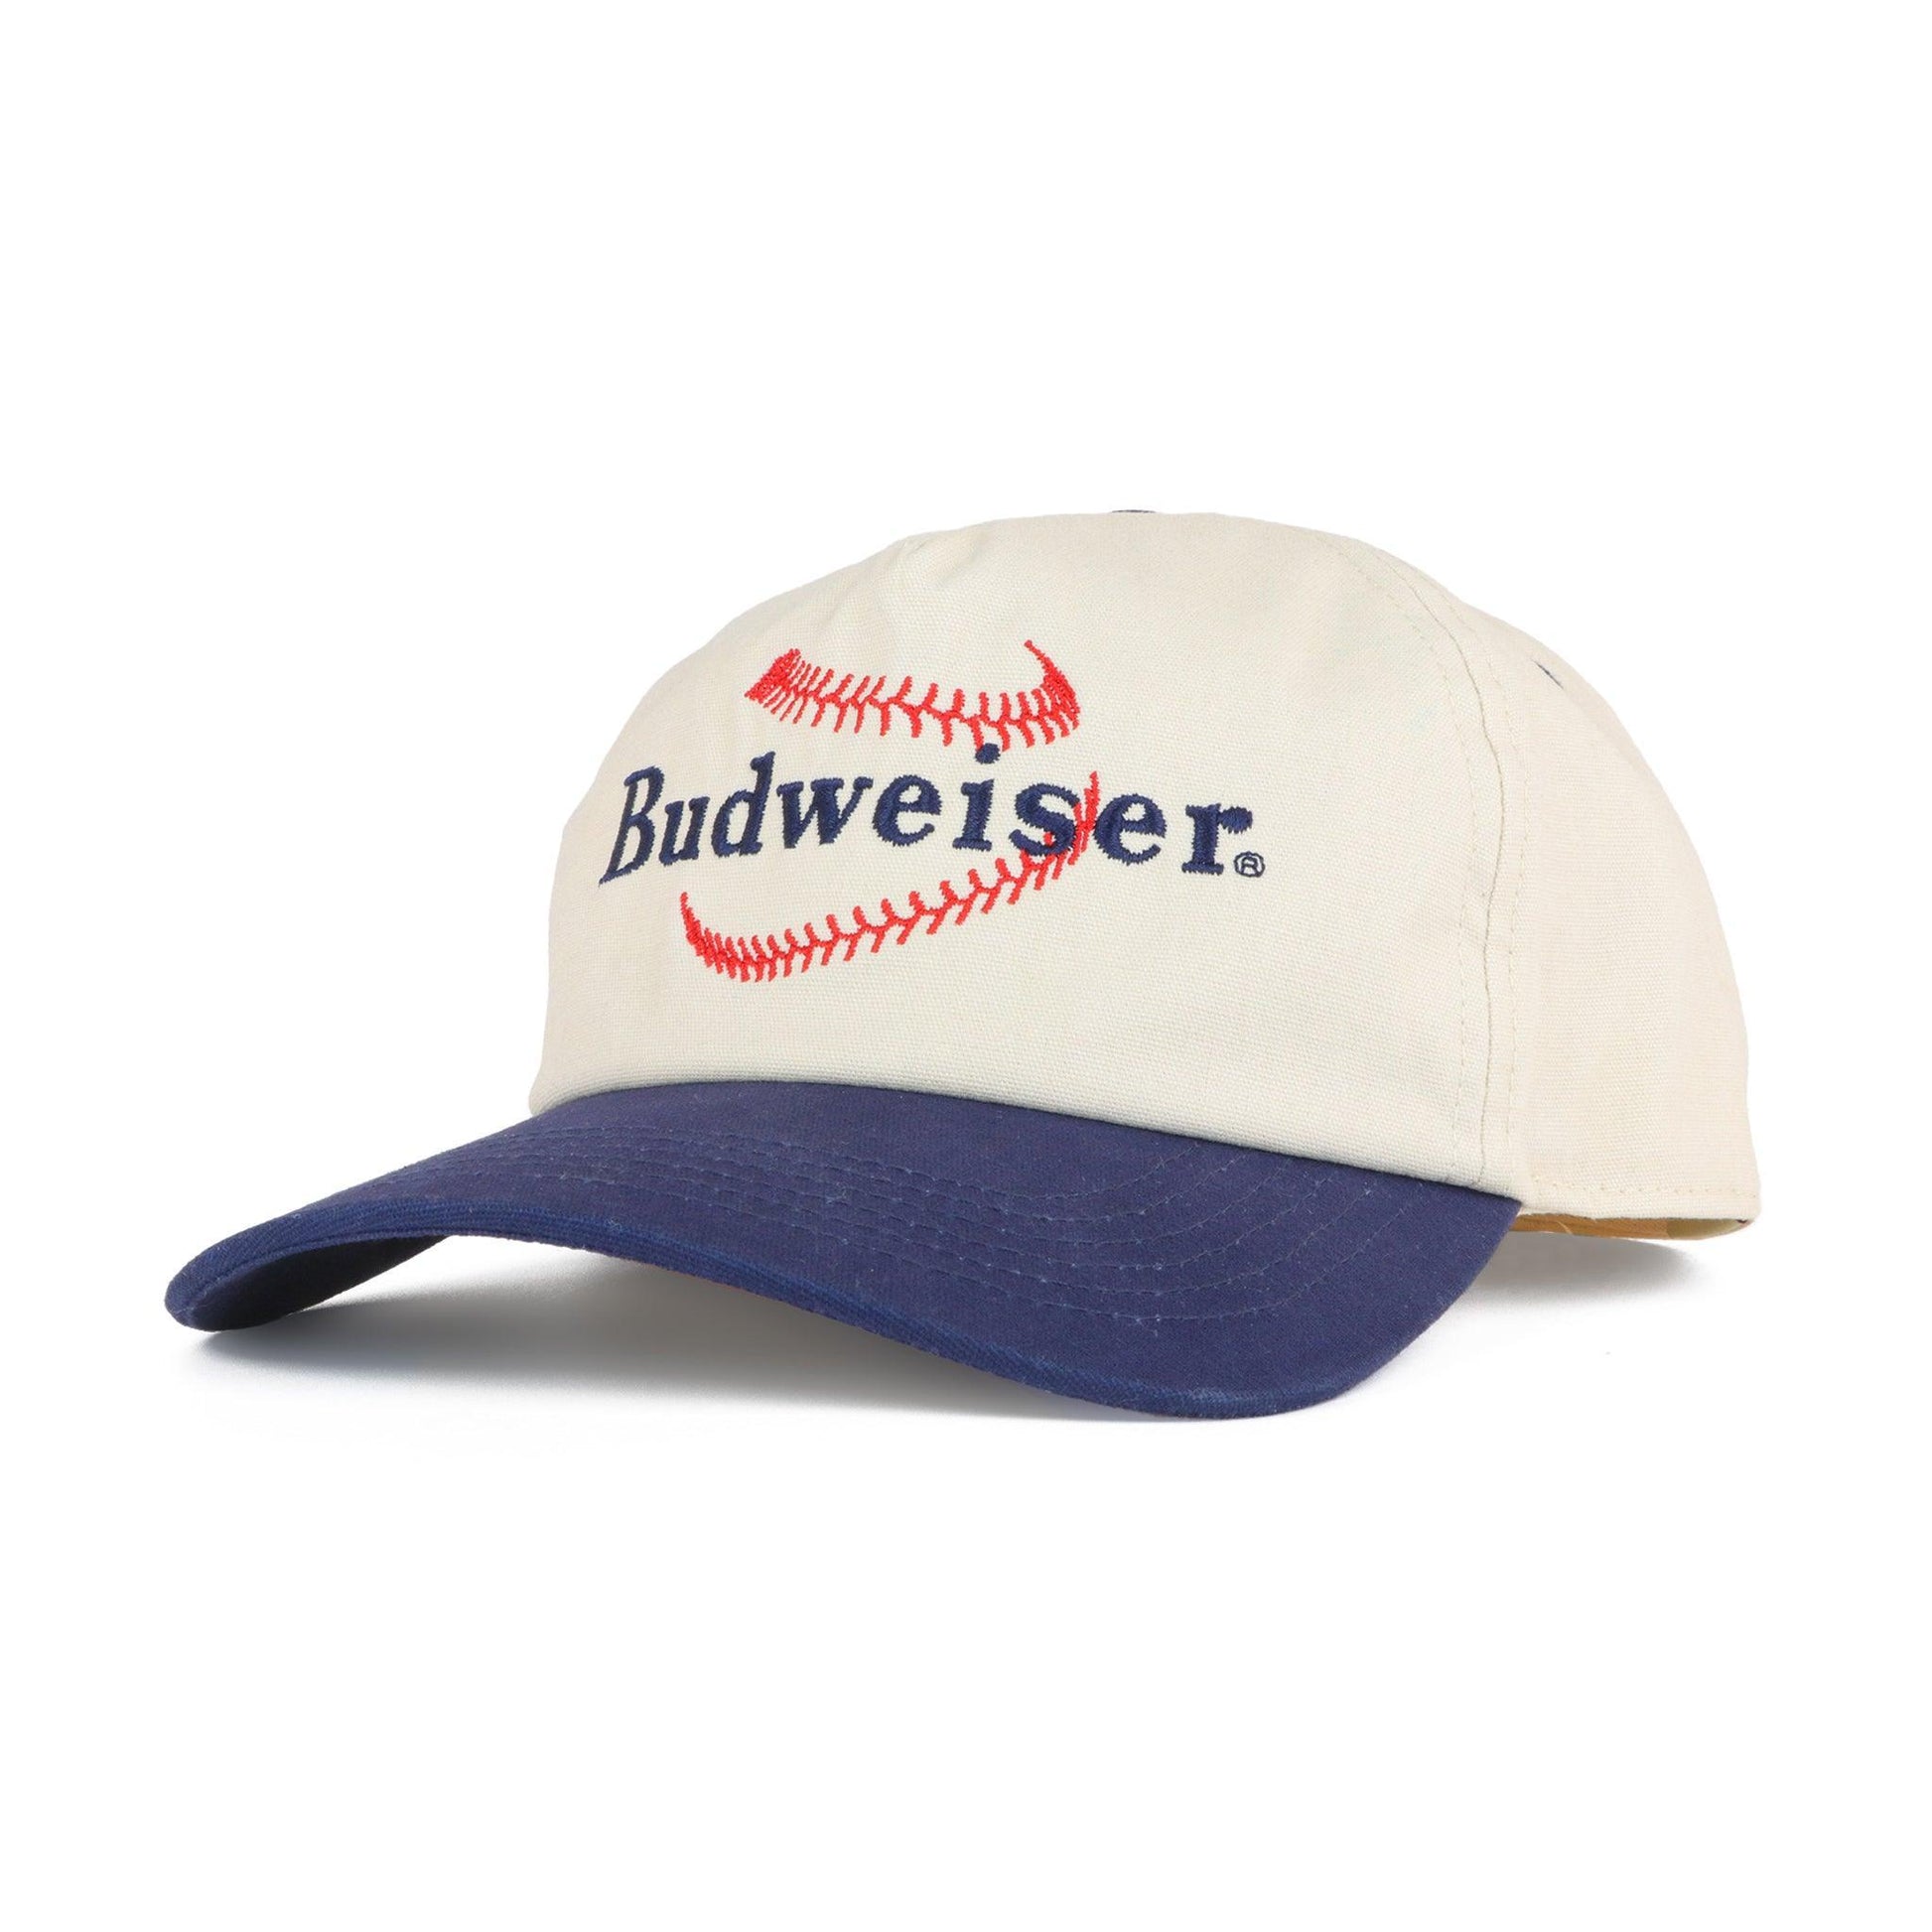 Cream colored hat with navy bill. Budweiser embroidered logo with baseball stitches around the name Budweiser